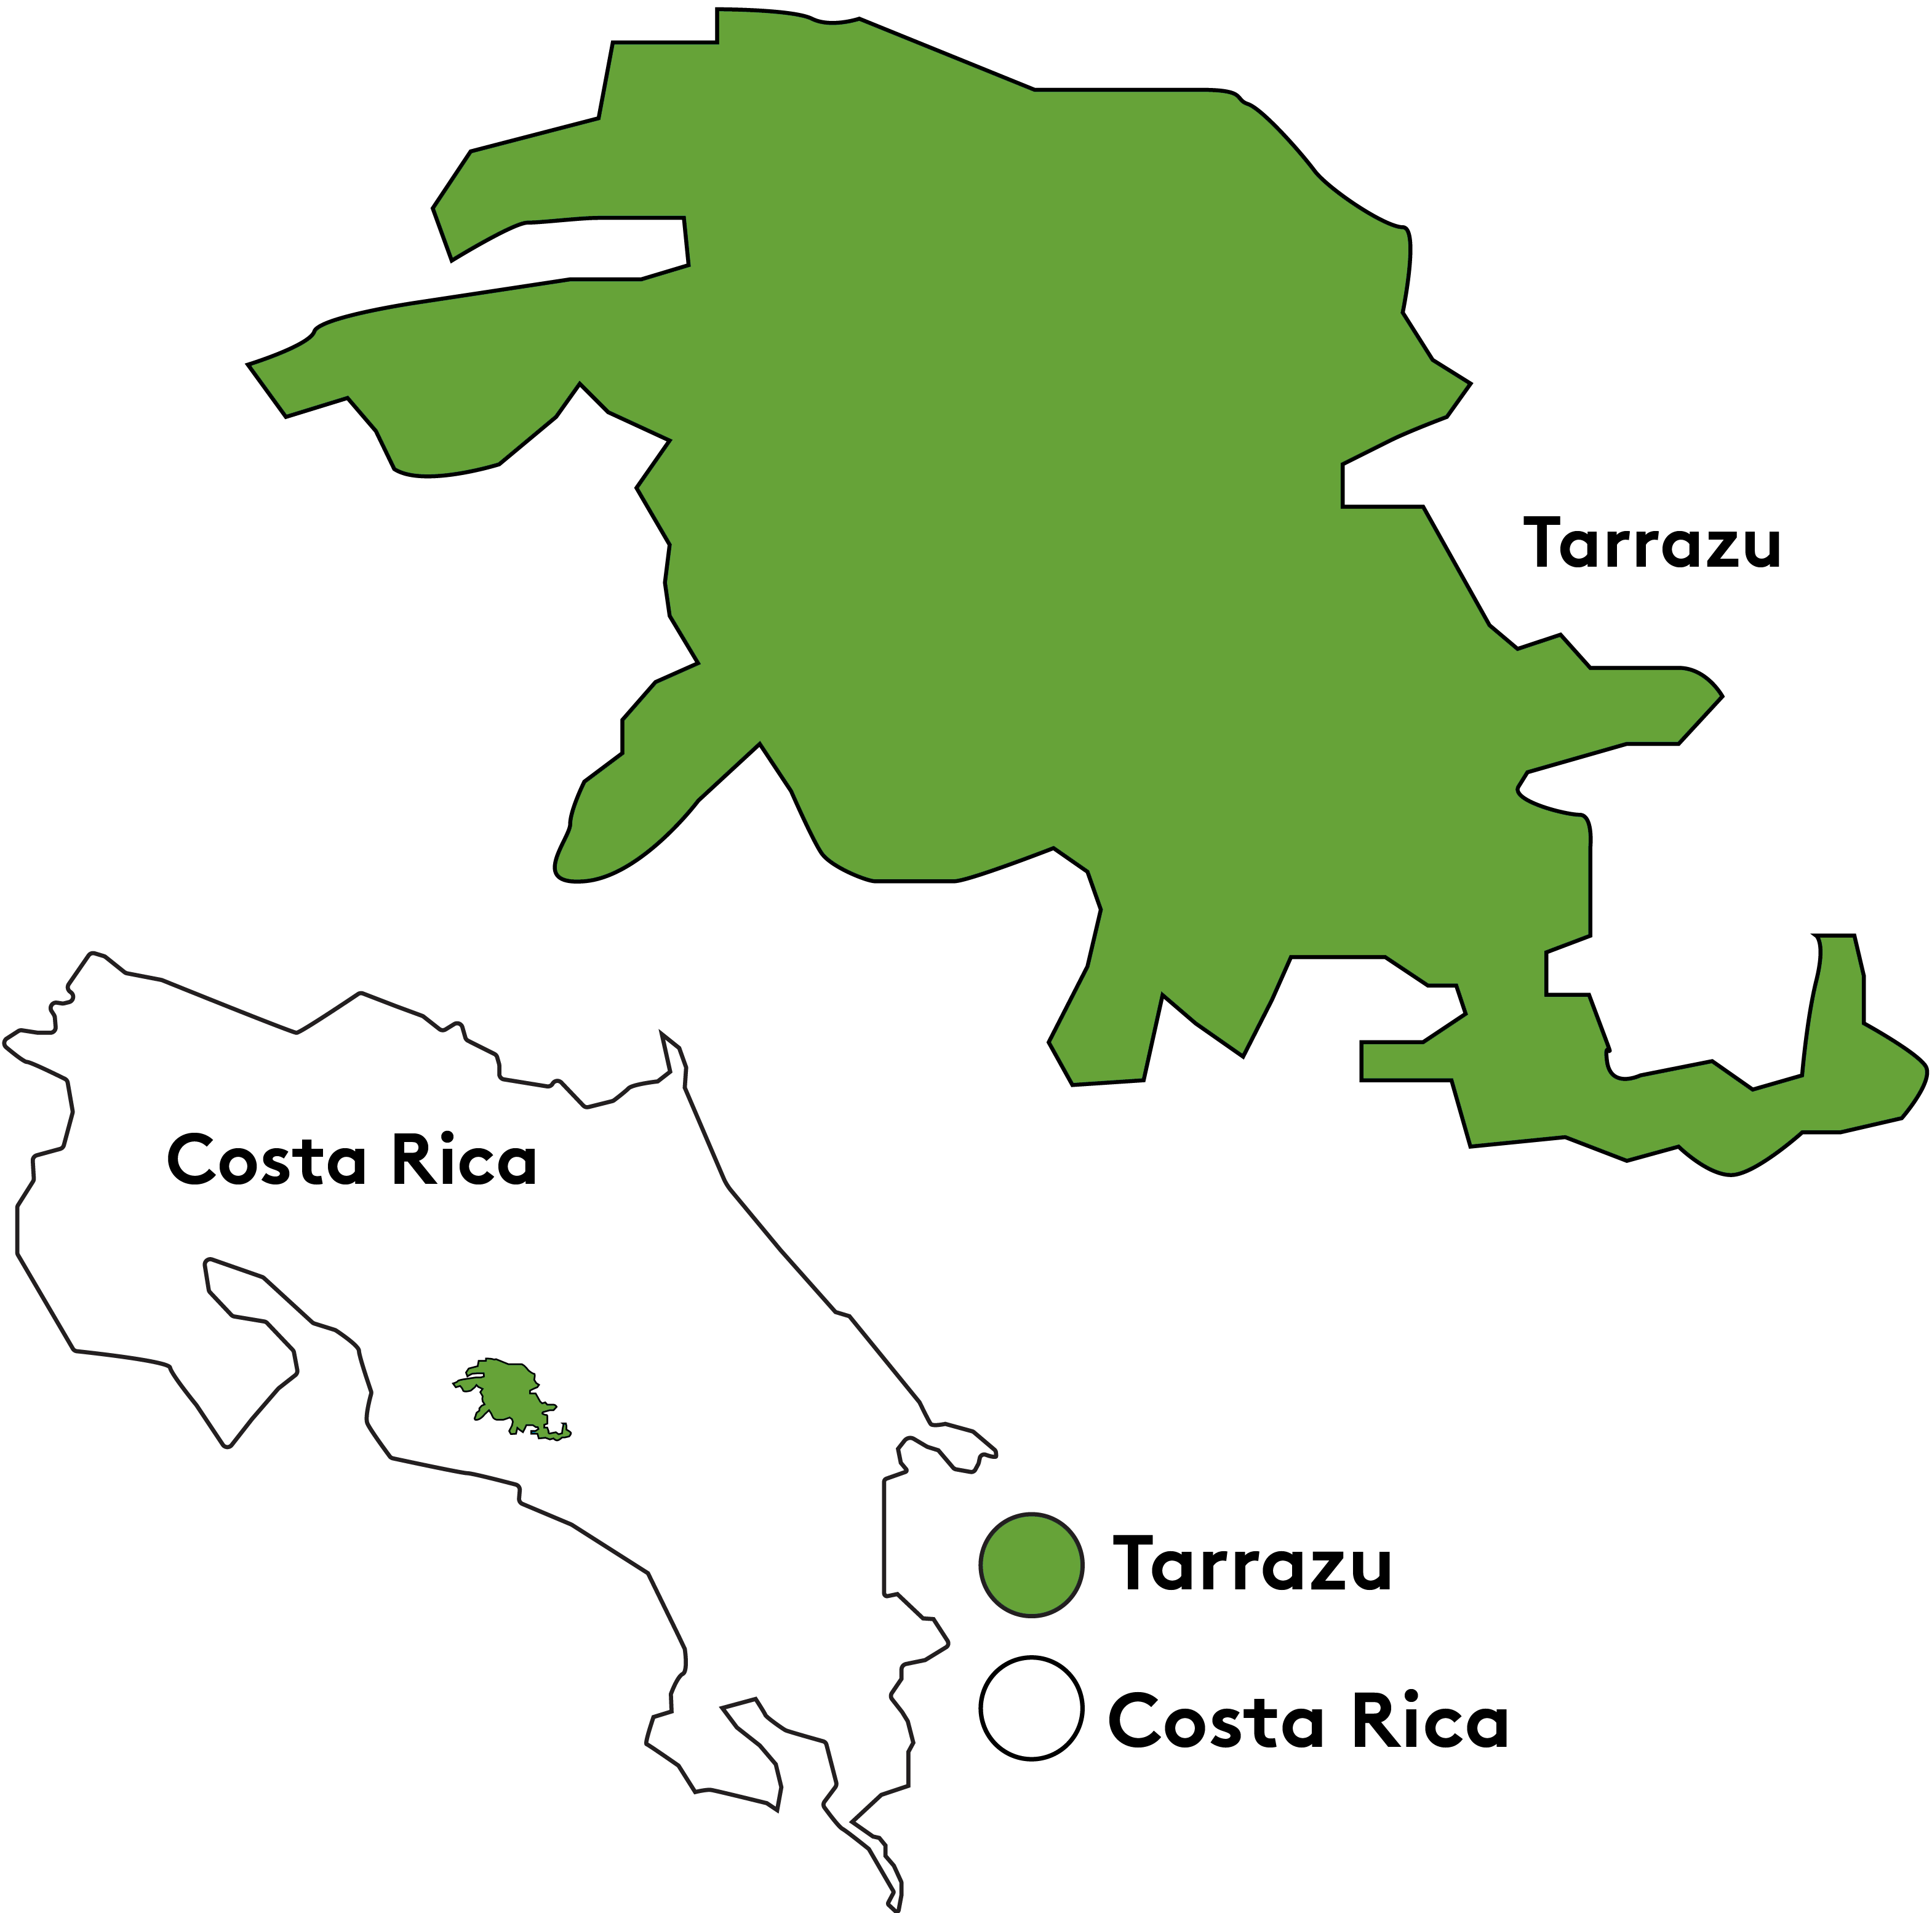 map of costa rica with the tarrazu region highlighted